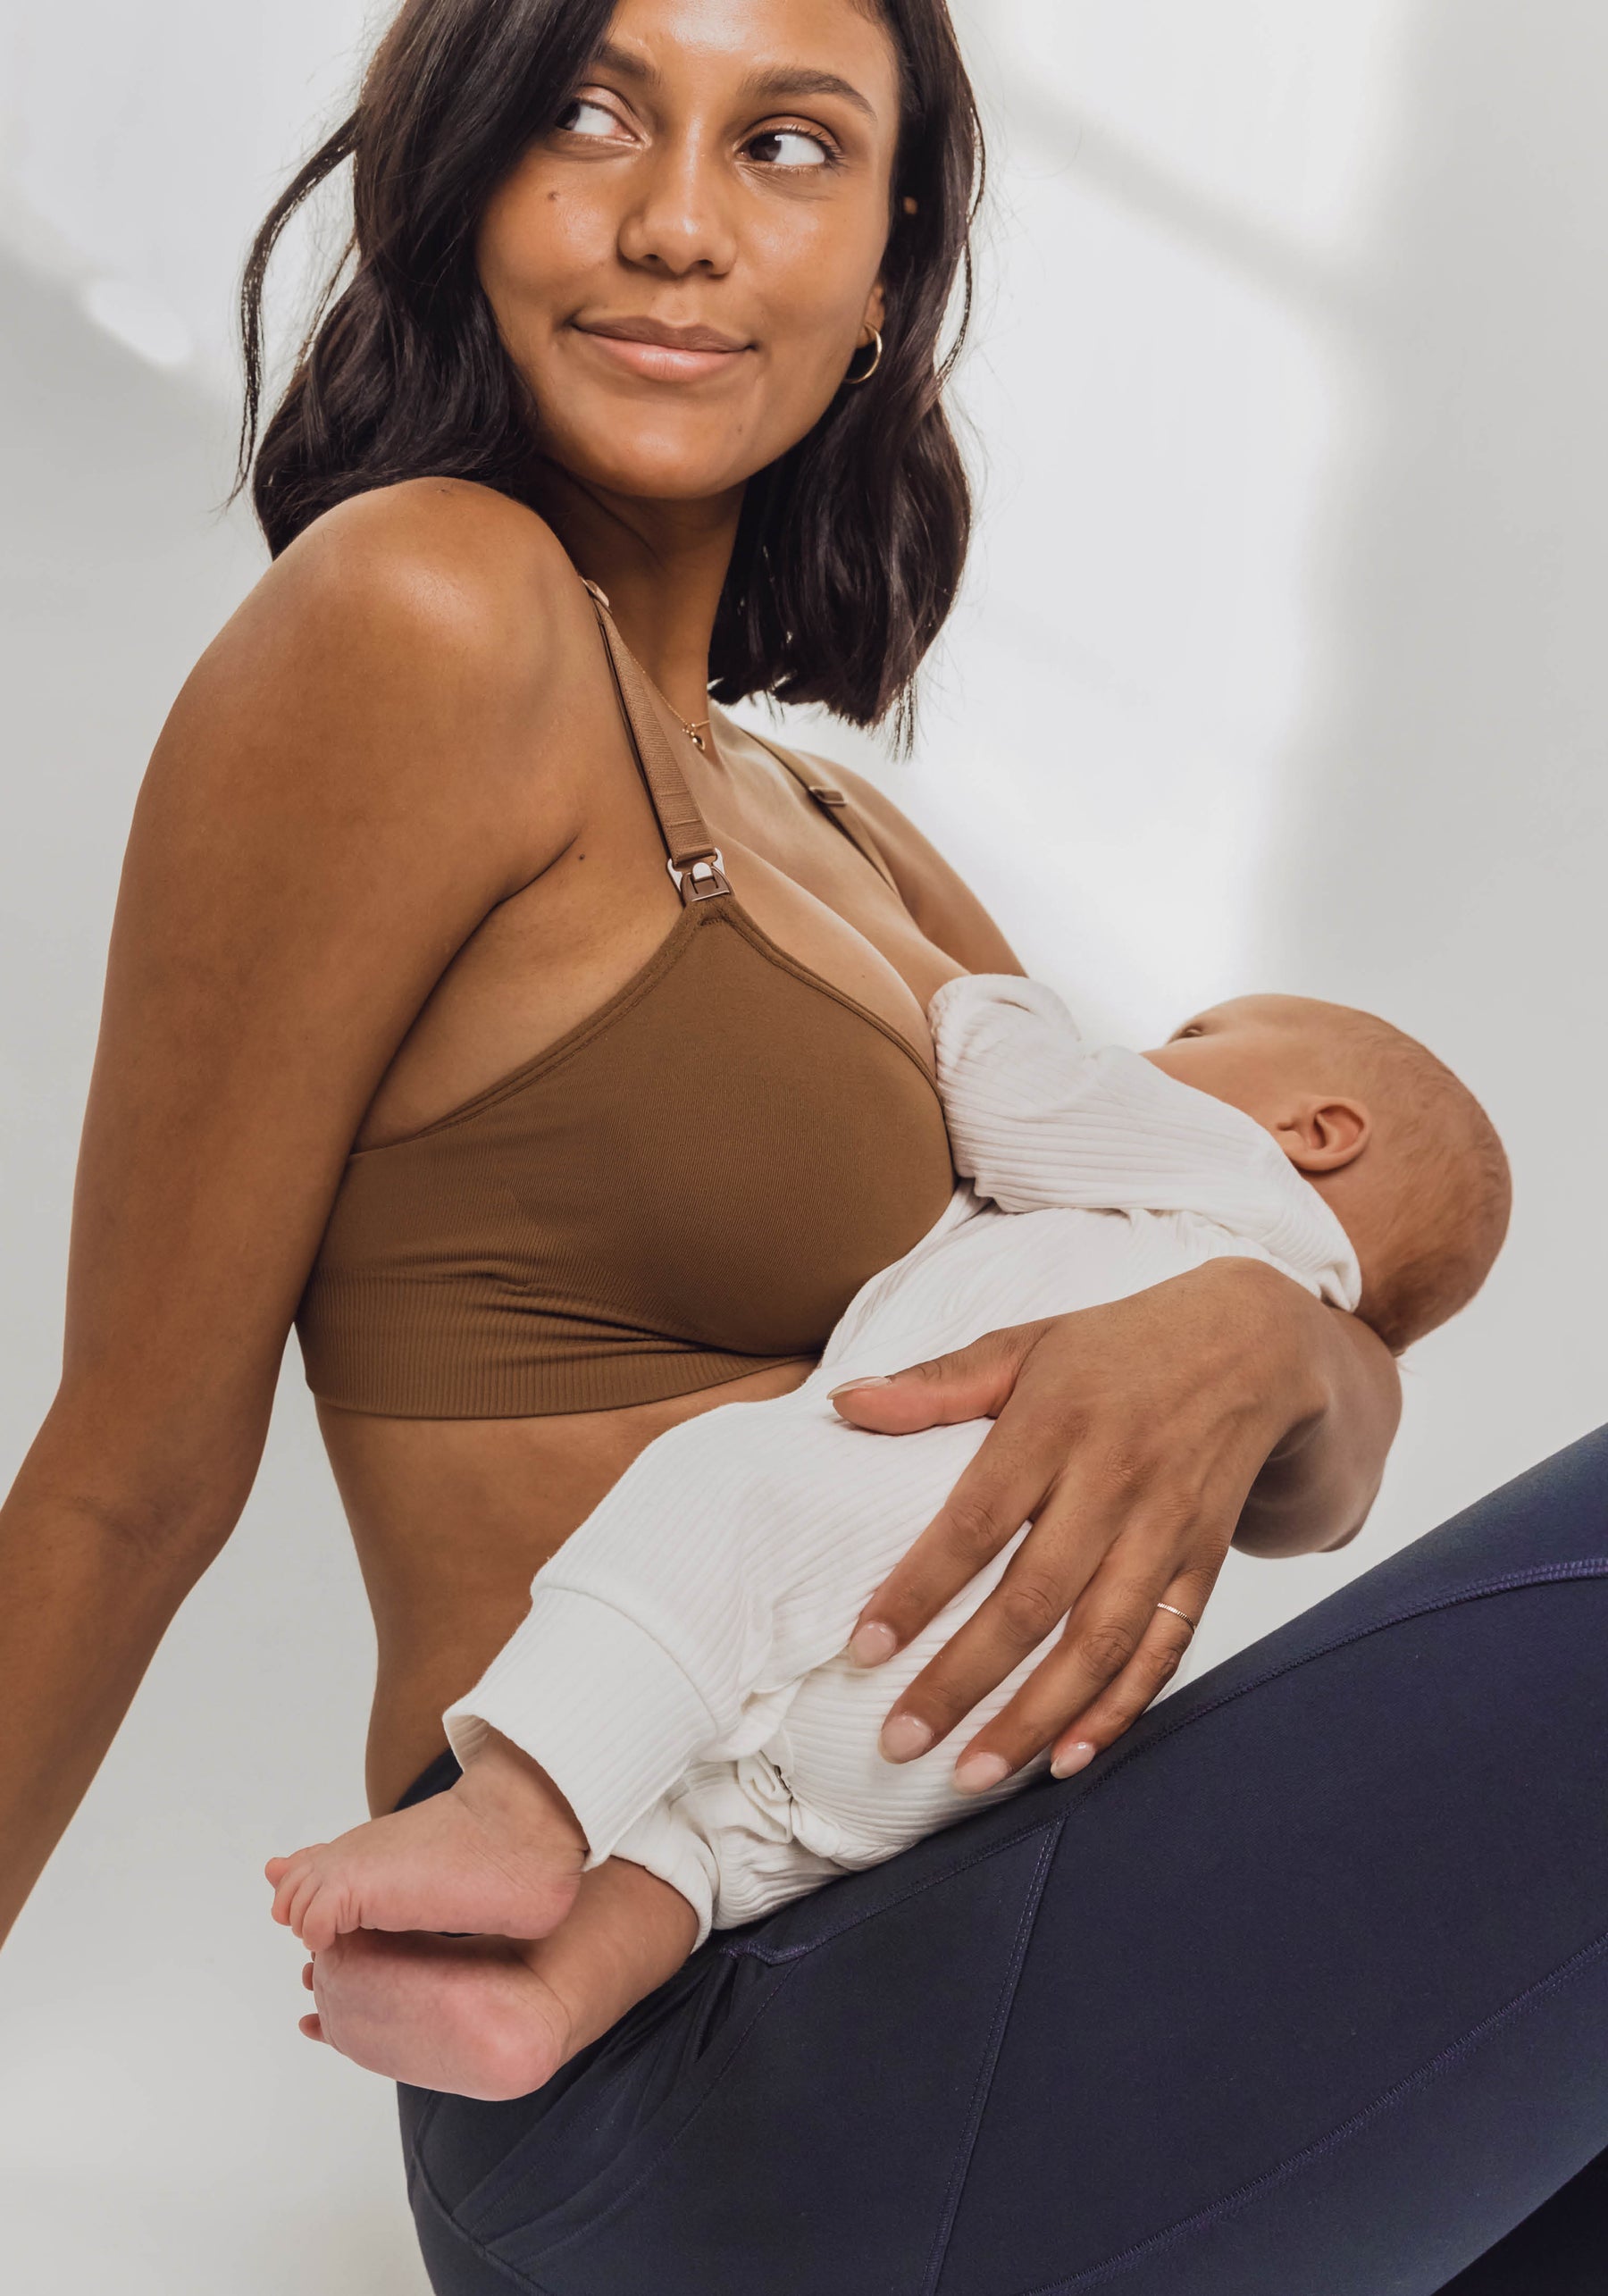 Is It Safe To Wear A Bra During Breastfeeding? - Being The Parent